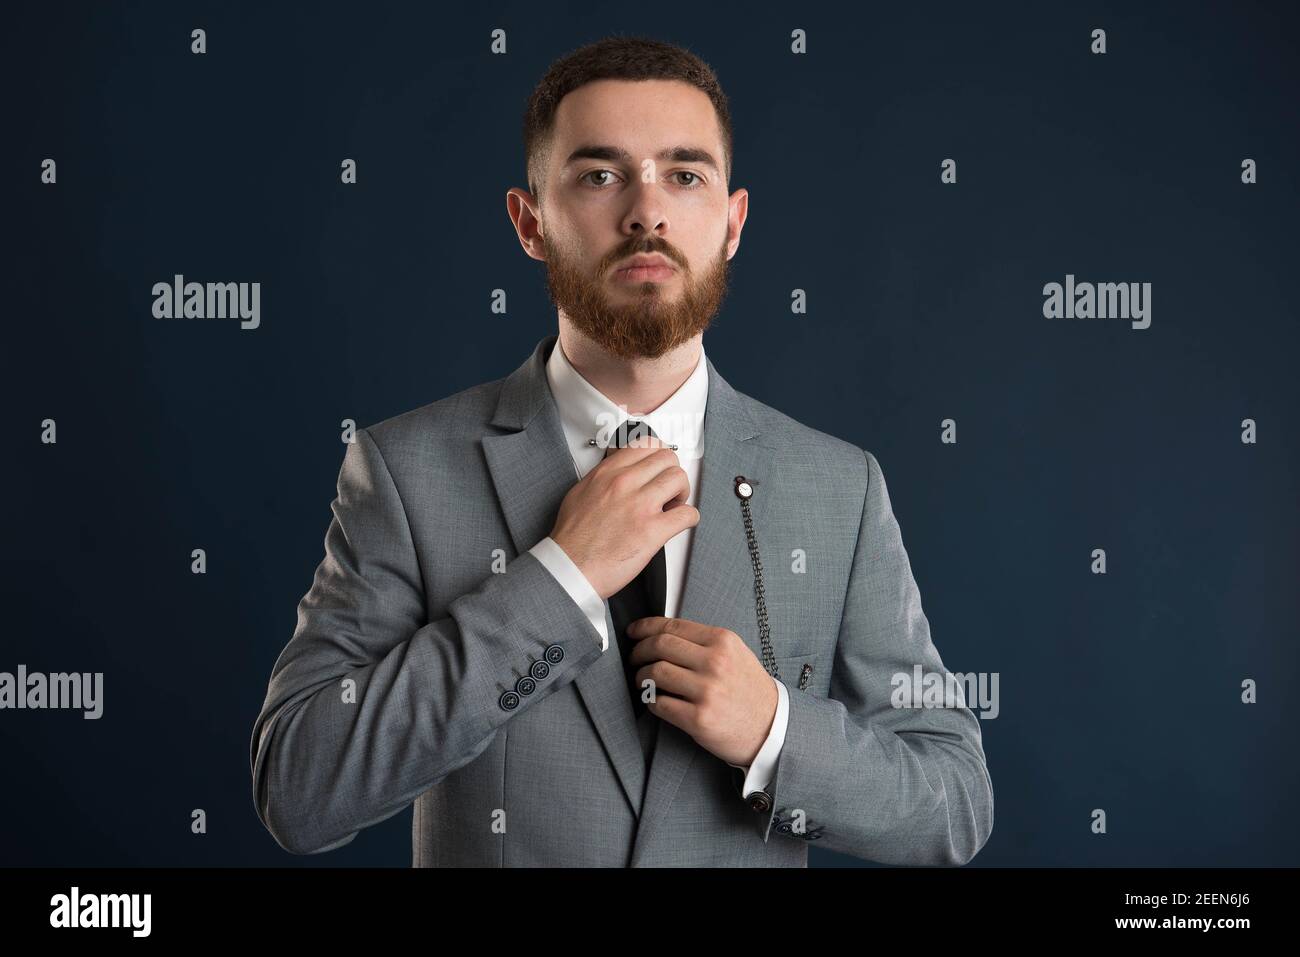 Handsome businessman fixing his black tie wearing a grey jacket Stock Photo